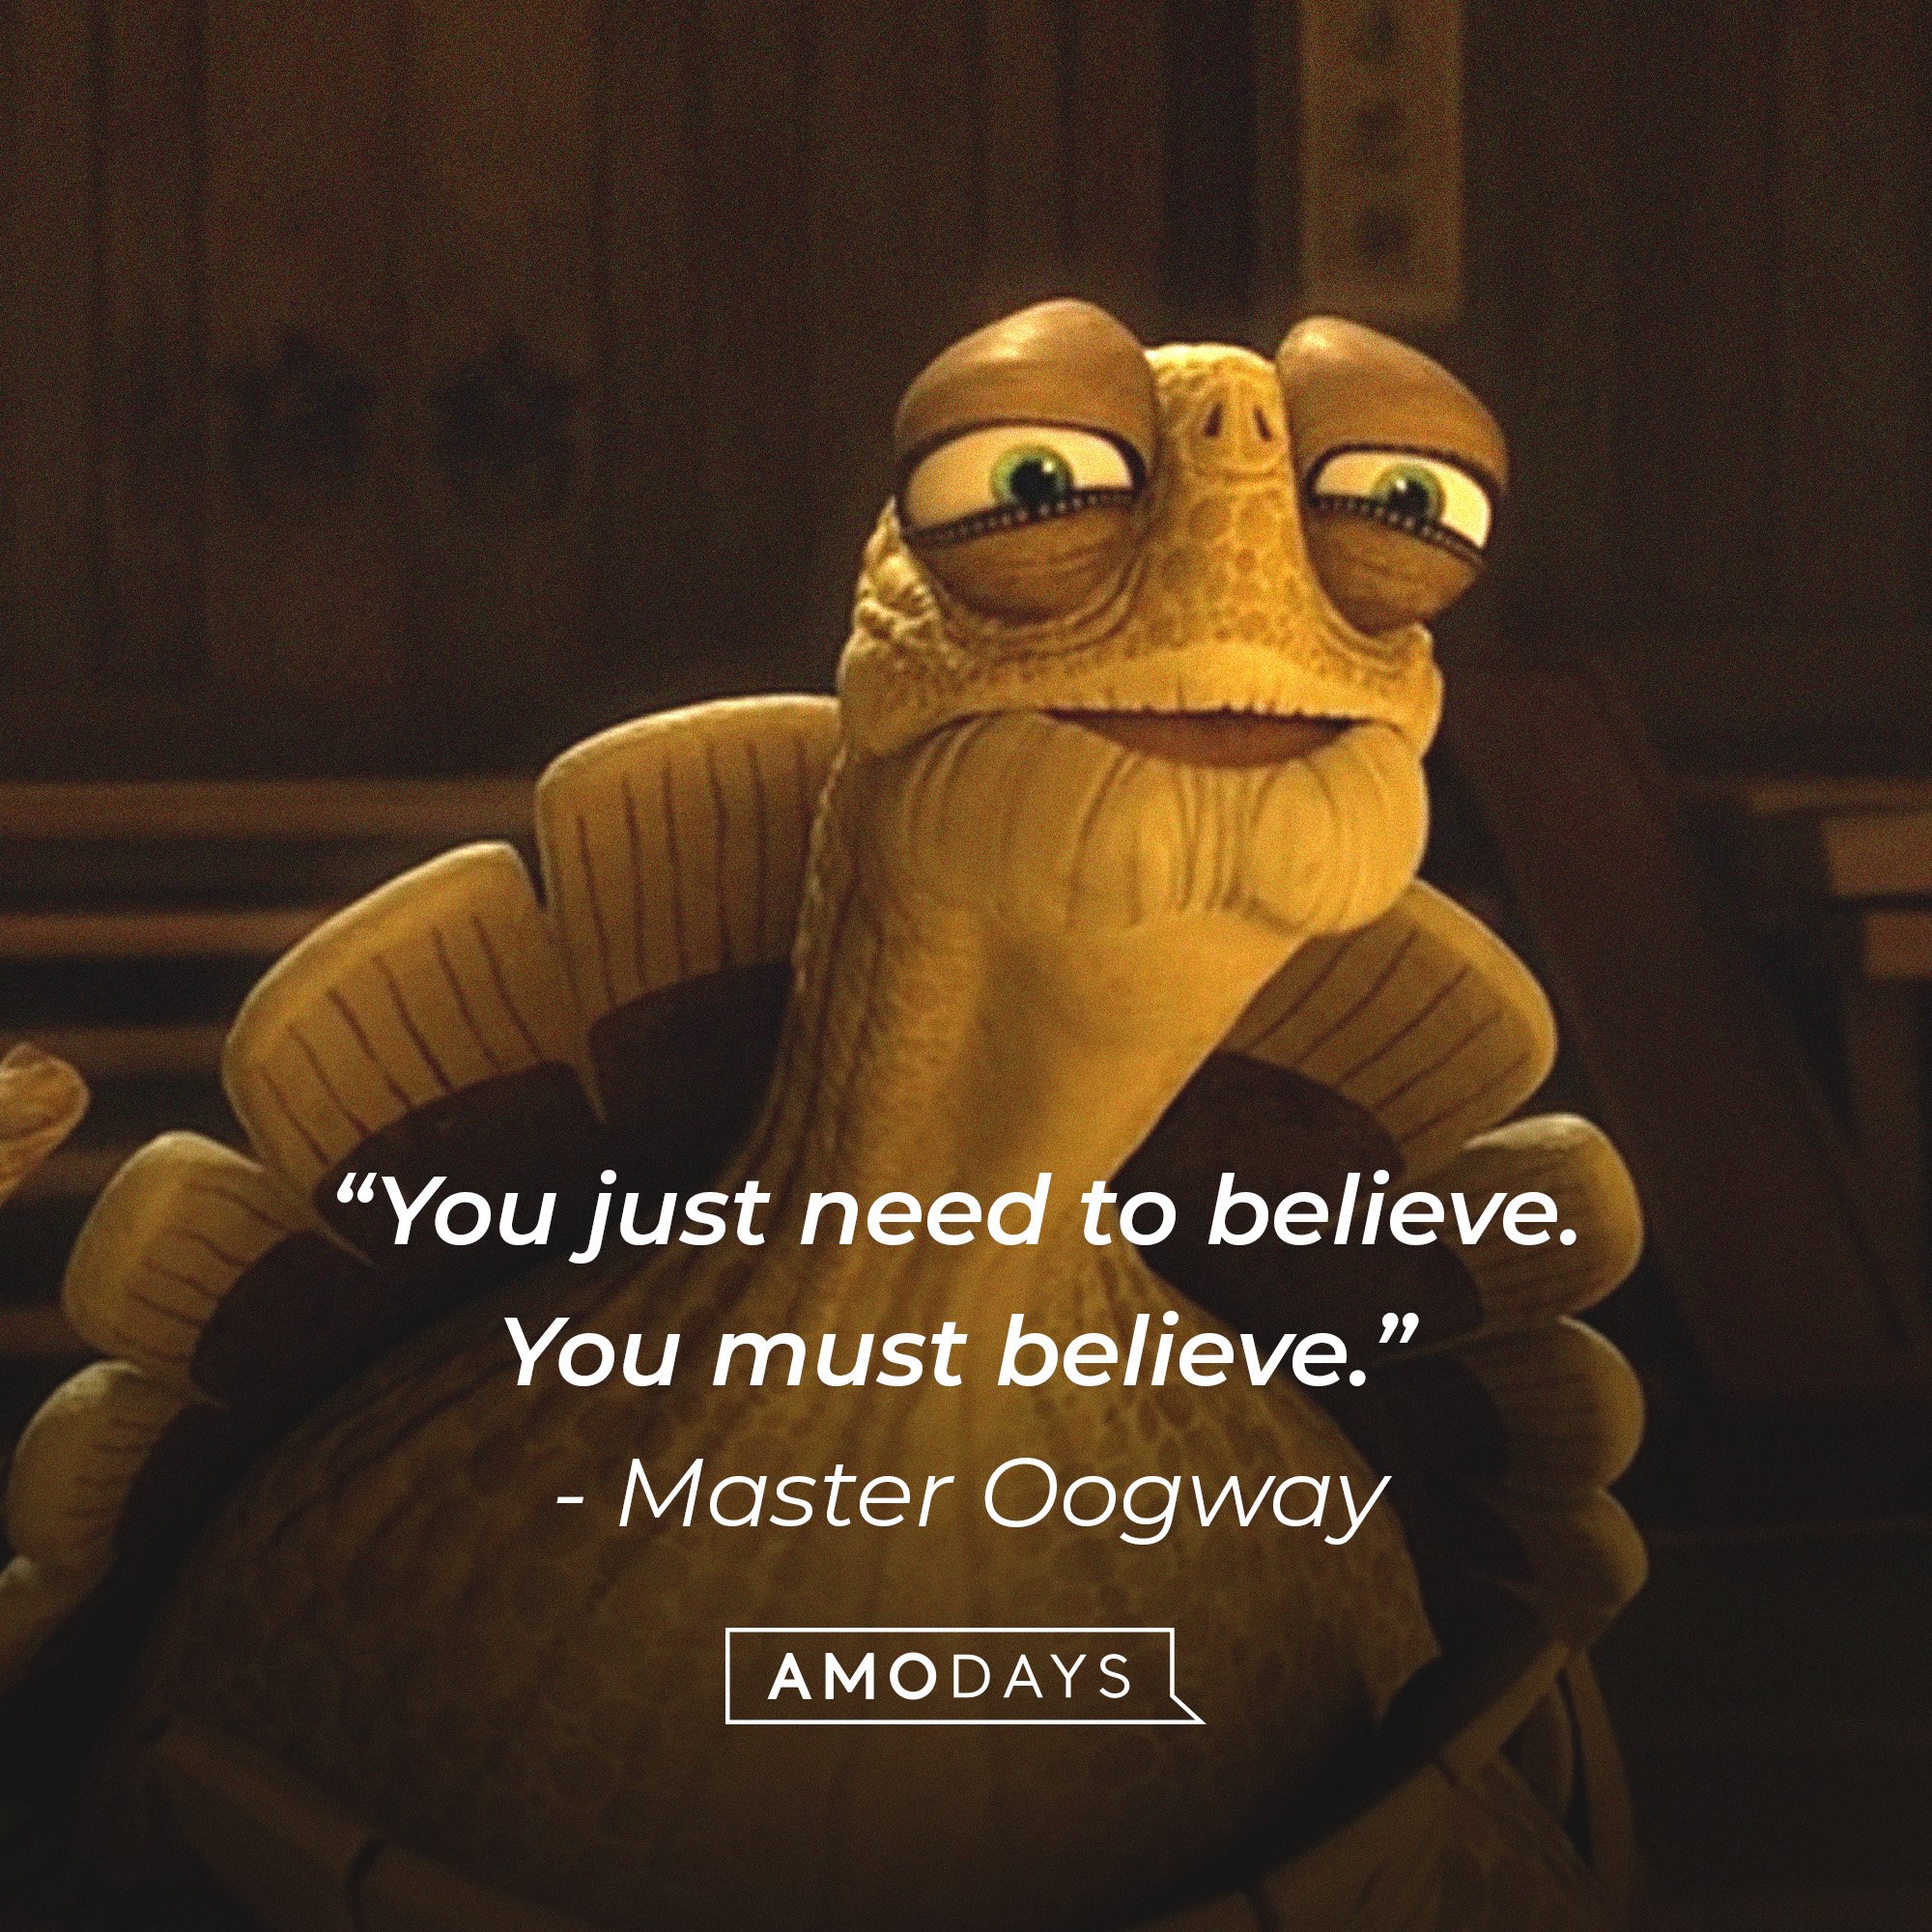 Master Oogway’s quote: “You just need to believe. You must believe.” | Image: AmoDays